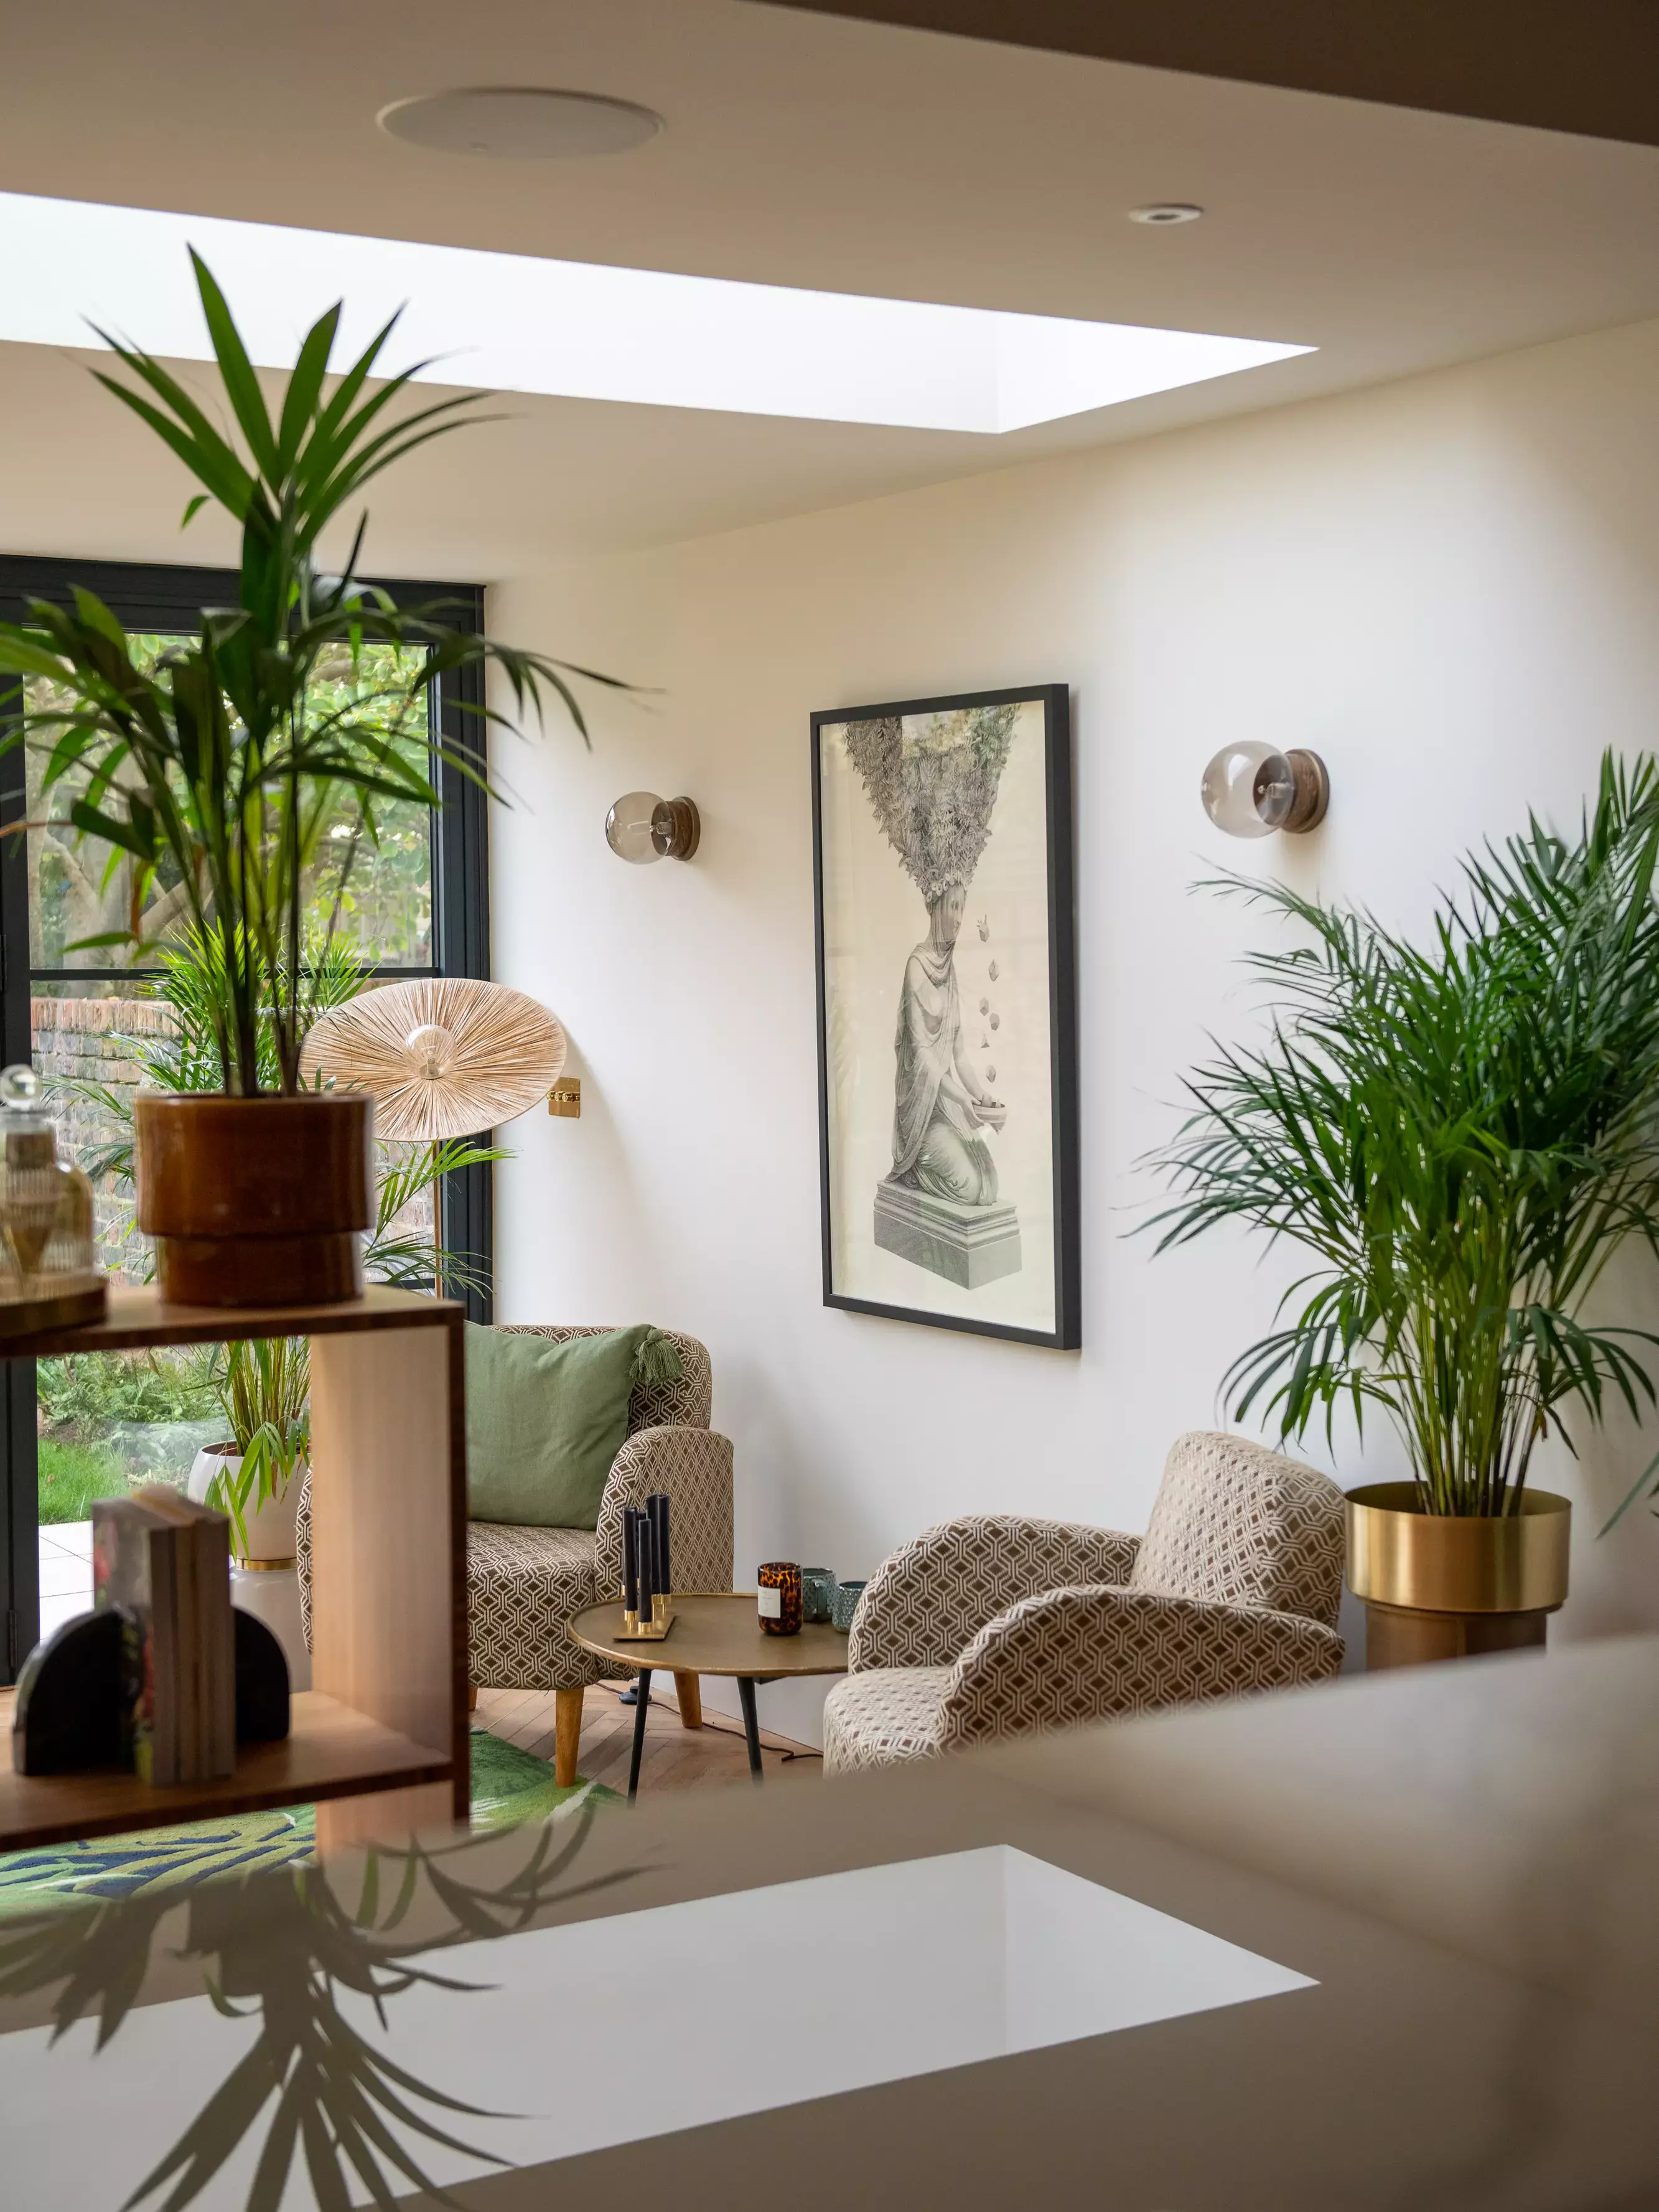 Modern living room with VELUX skylight, patterned armchairs, and indoor plants.